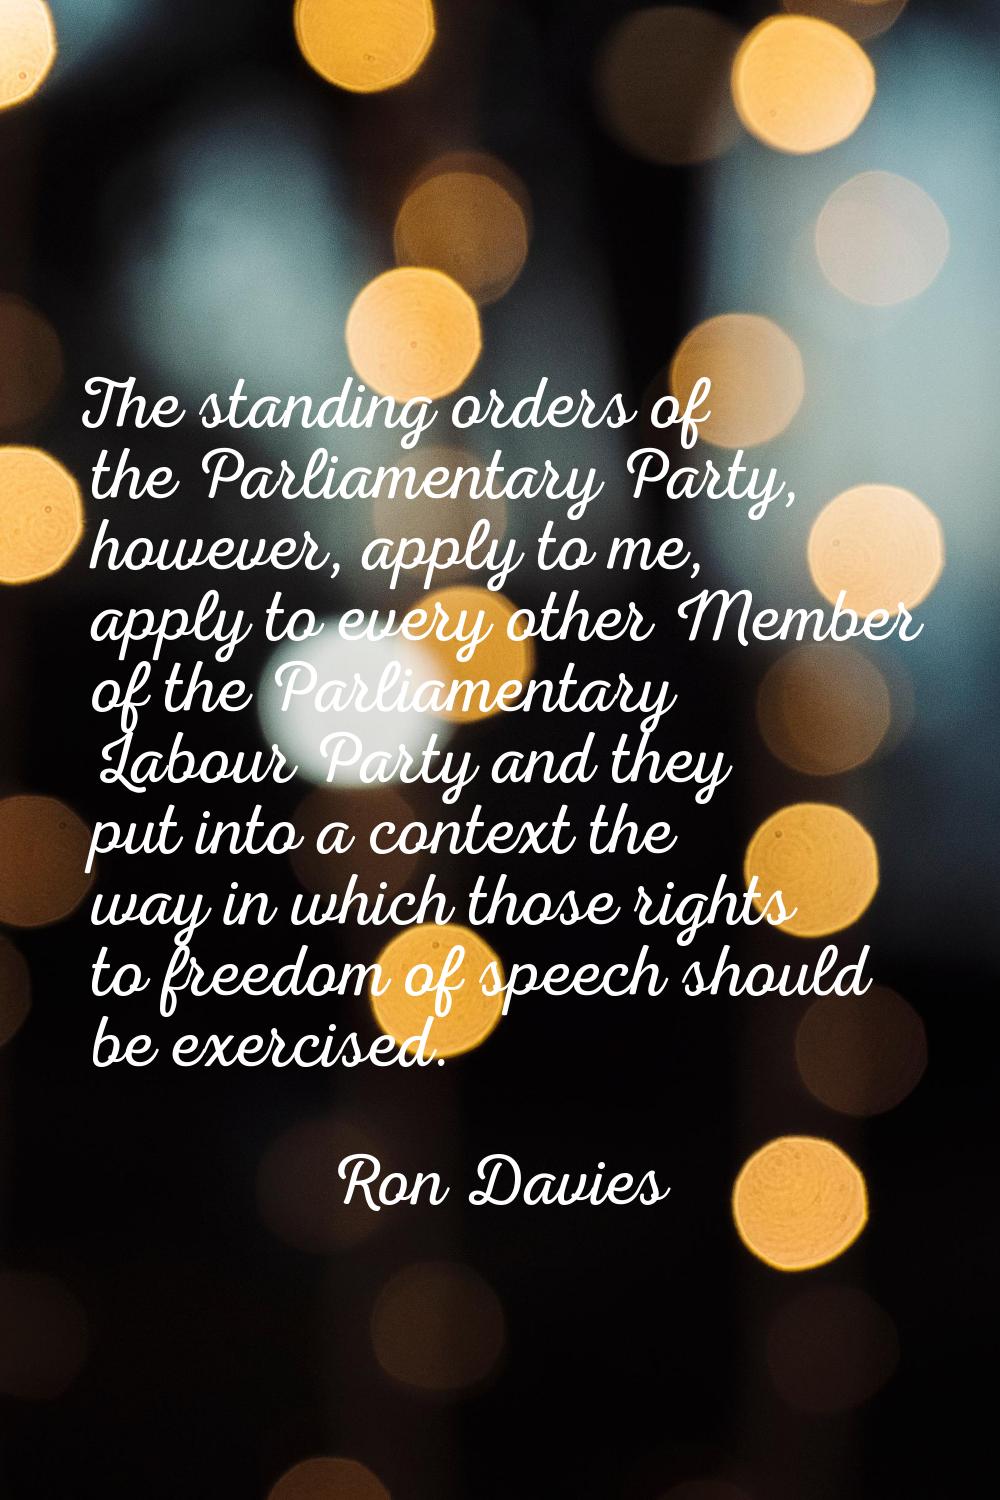 The standing orders of the Parliamentary Party, however, apply to me, apply to every other Member o